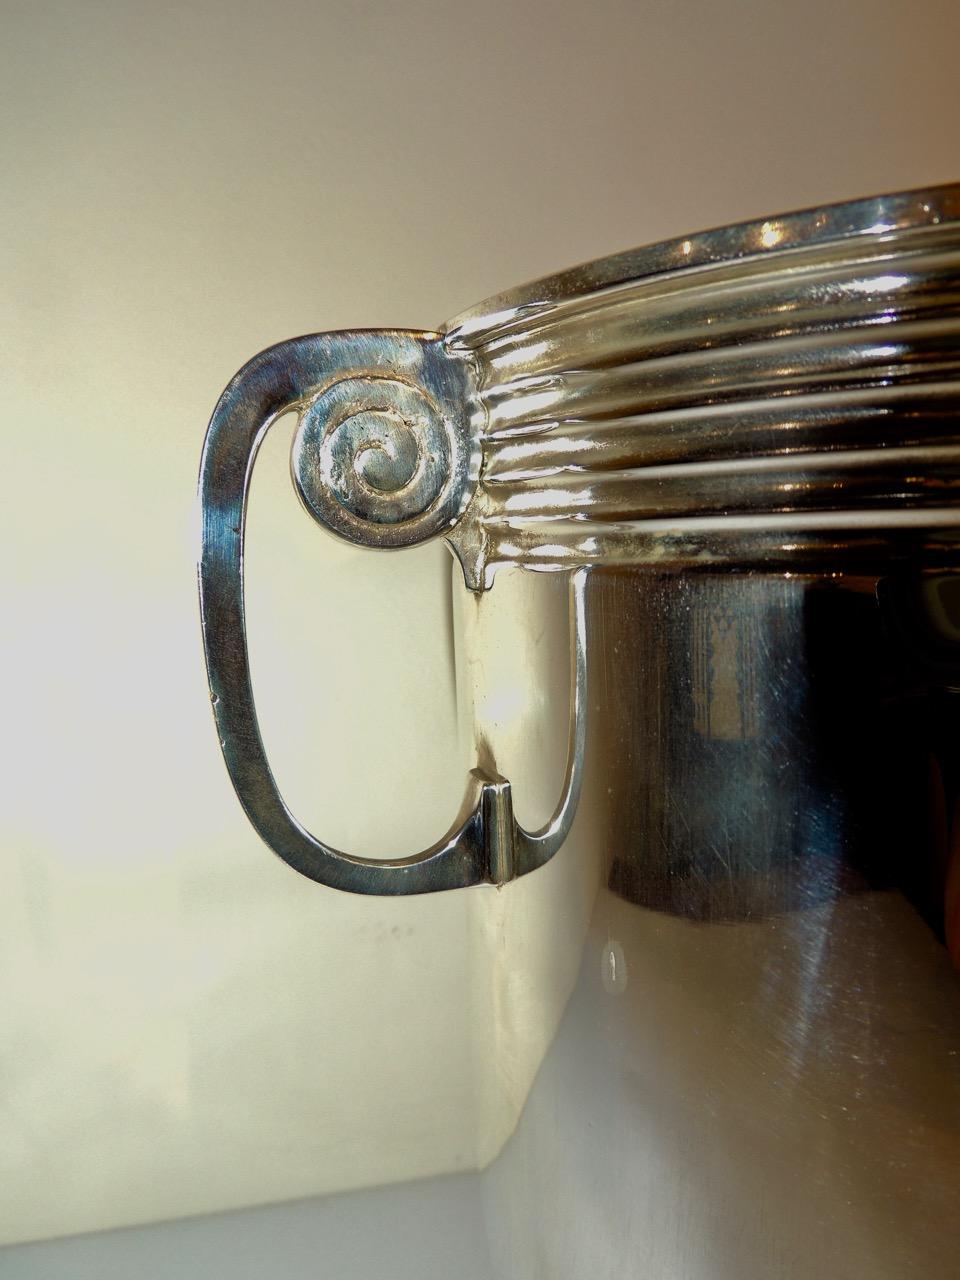 A sleek, modernist, French silver plate champagne cooler with unusual spiral detail handles. Another accent is the matching bands at the top and bottom of the piece. This is heavily plated, recently restored and in great condition both inside and